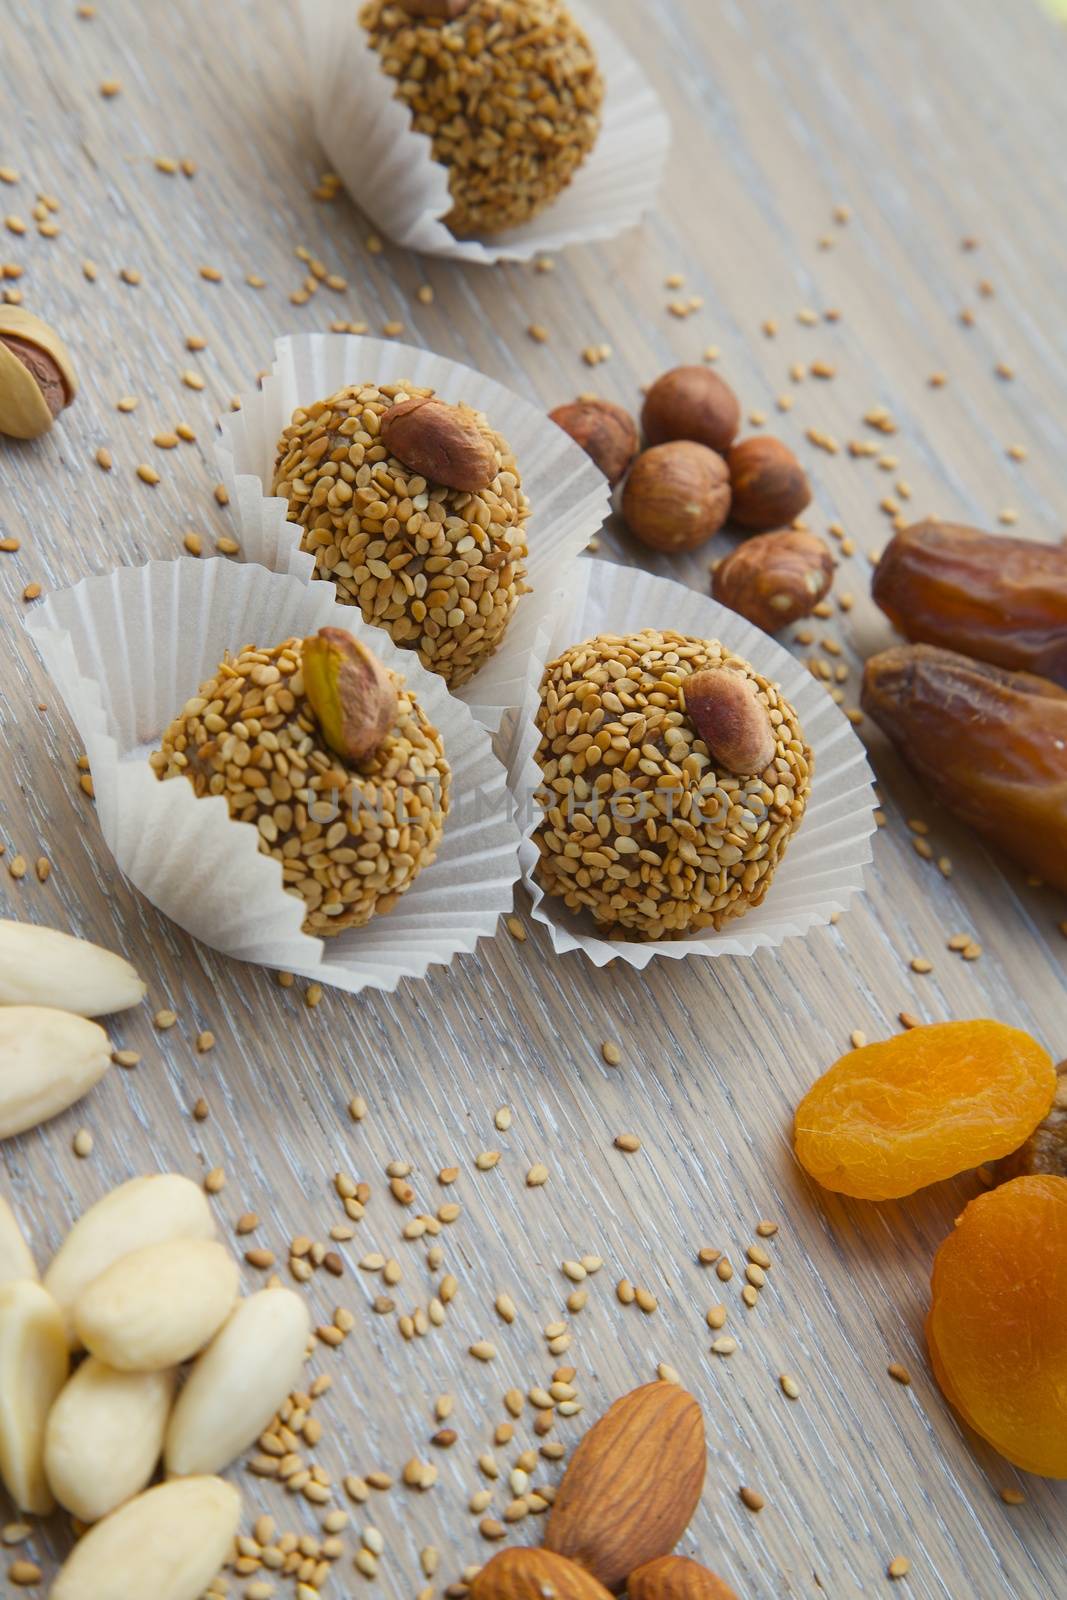 Homemade diet truffles with dried fruits and nut on an old black wooden surface